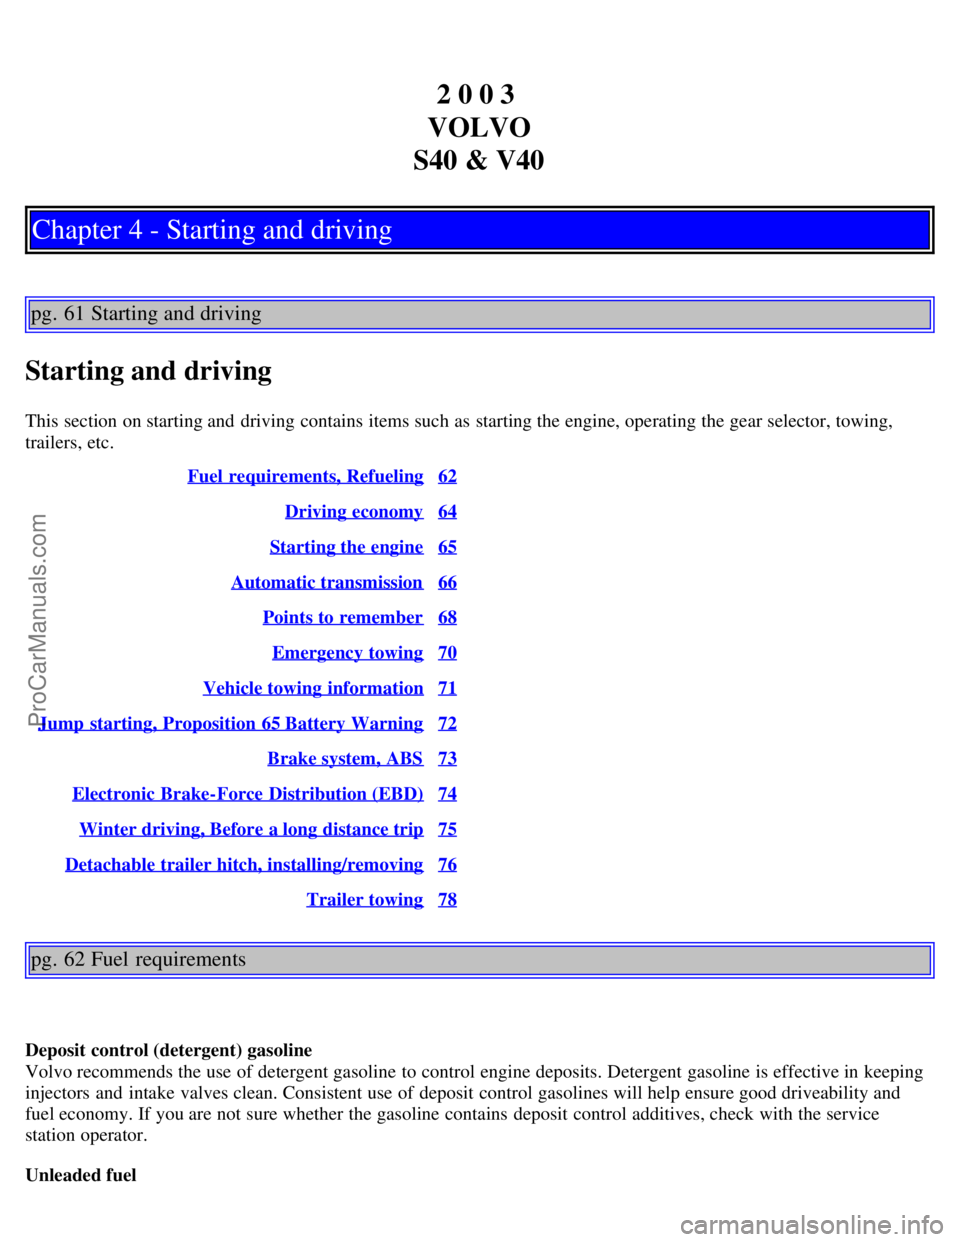 VOLVO S40 2003  Owners Manual 2 0 0 3 
VOLVO
S40 & V40
Chapter 4 - Starting and driving
pg. 61 Starting and driving
Starting and driving
This section on starting and  driving contains items such as starting the engine, operating t